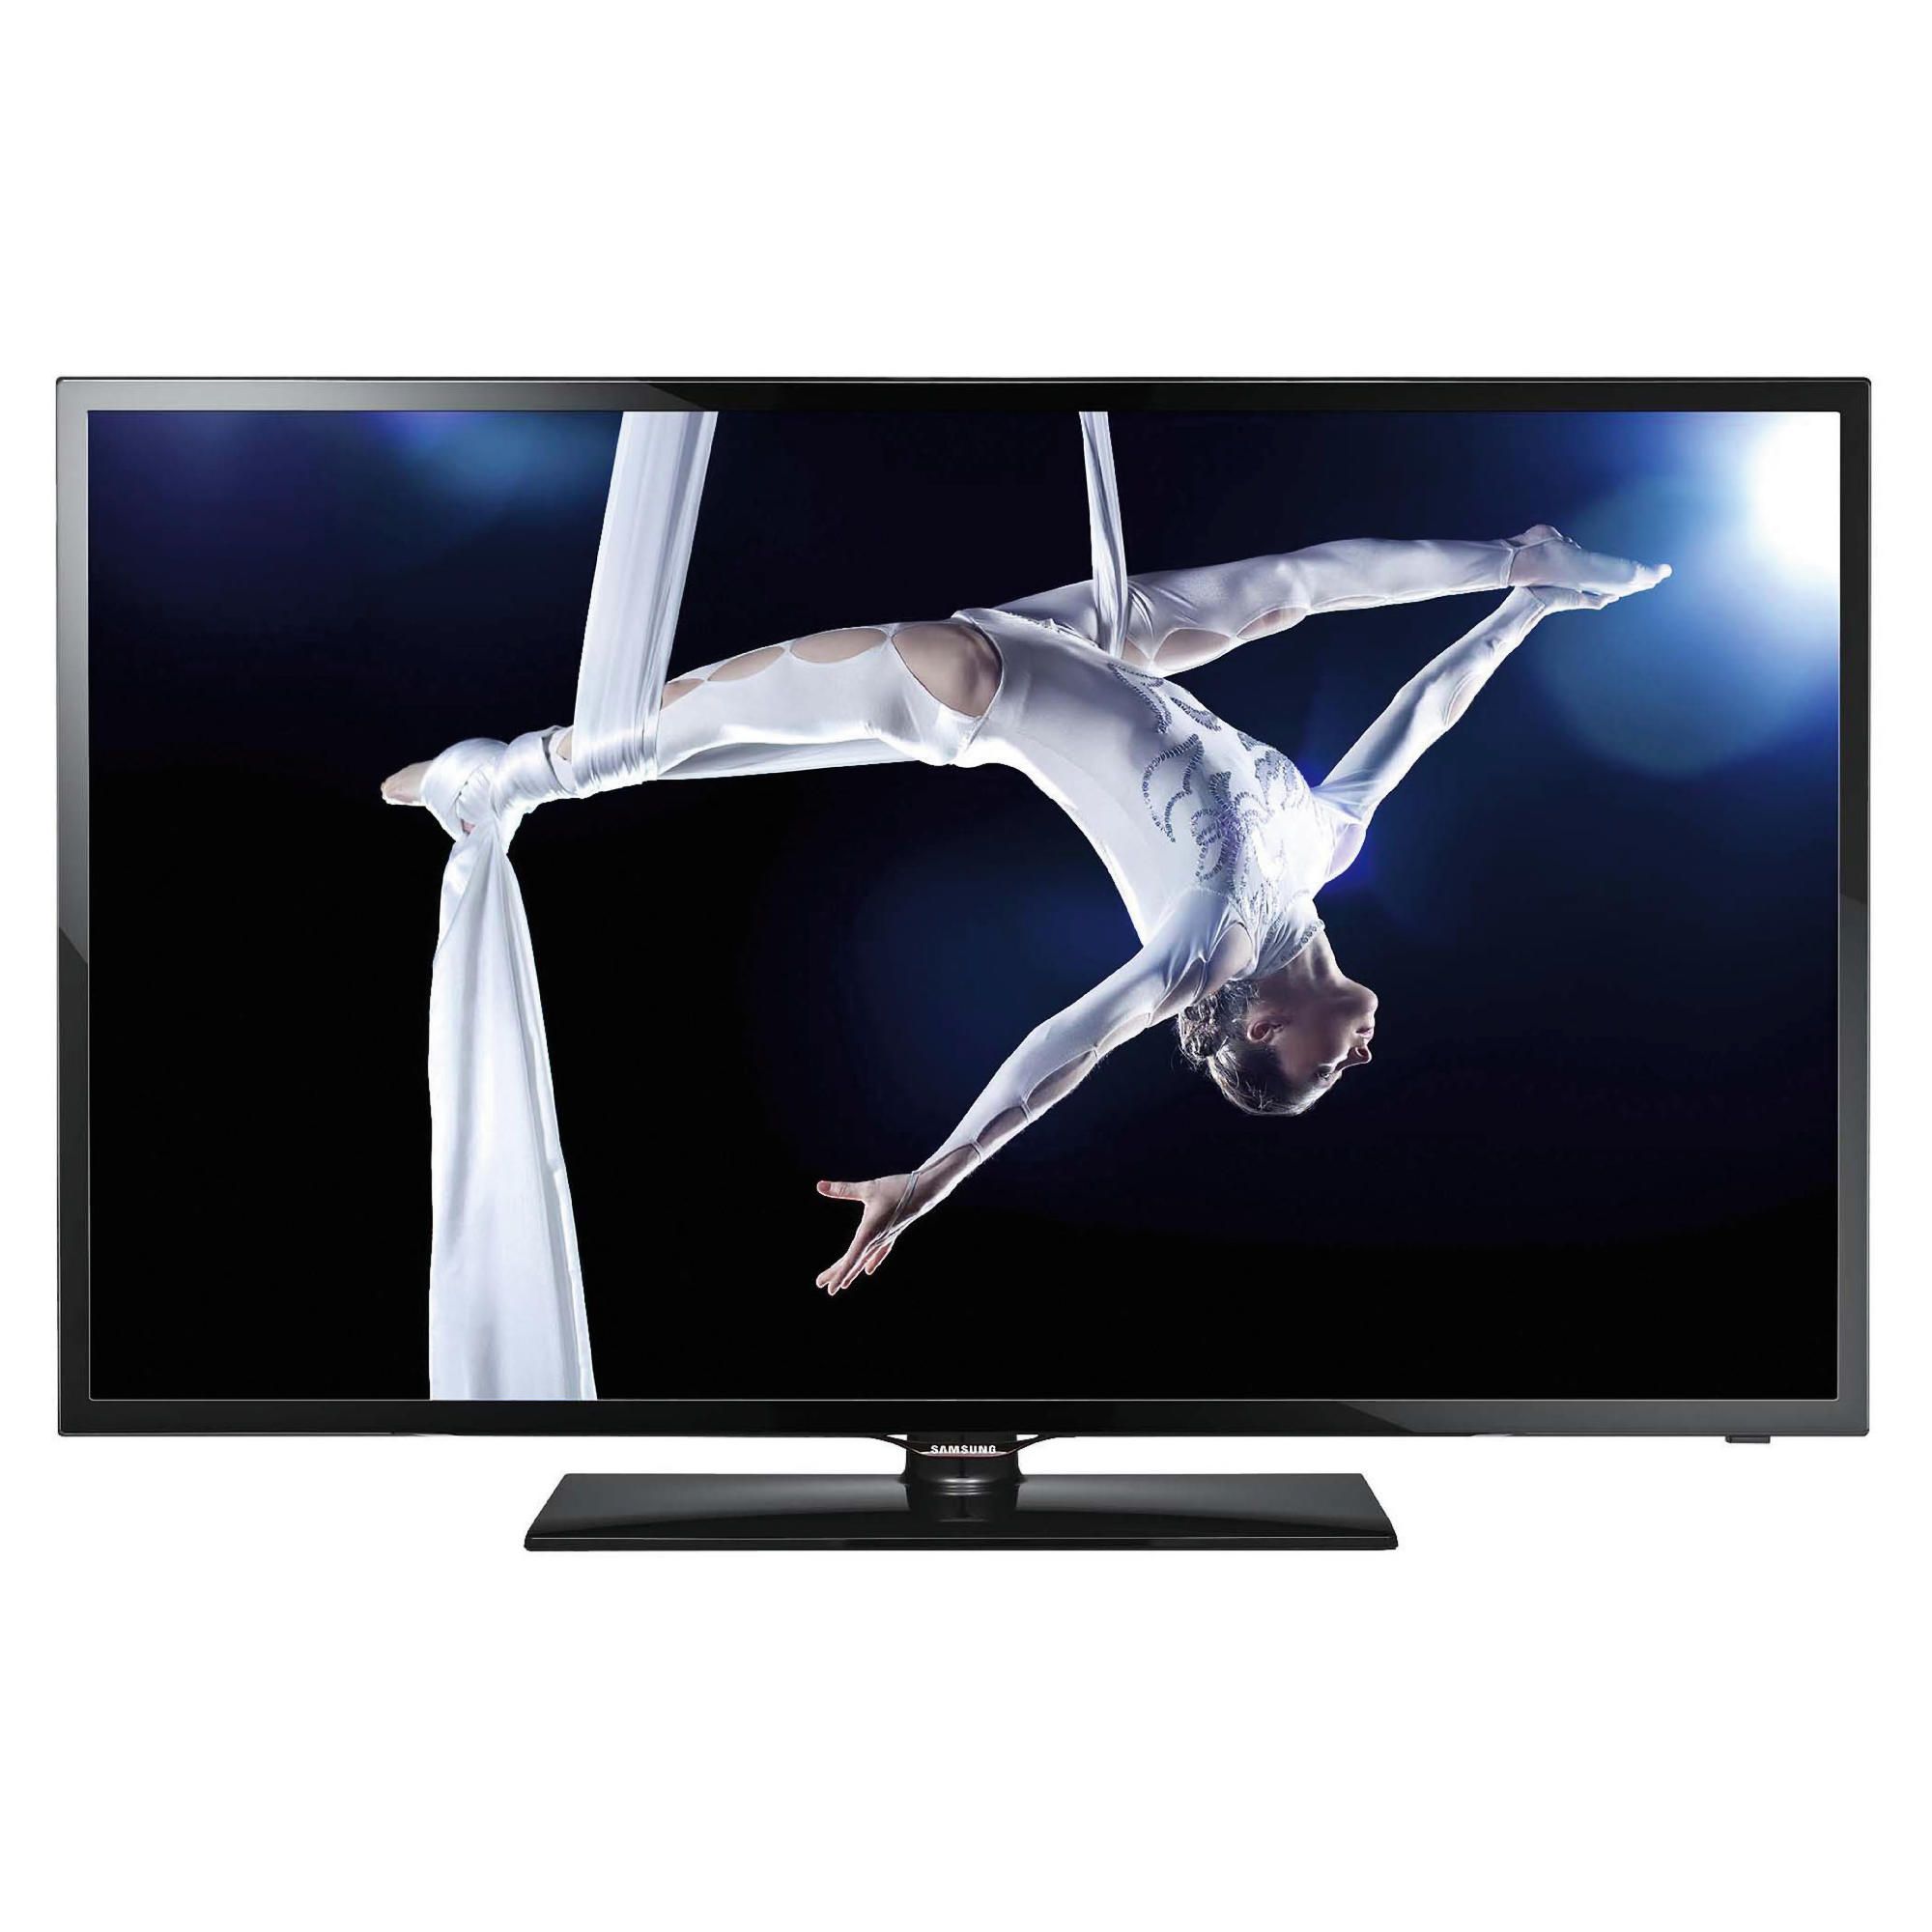 Samsung UE39F5000 39 inch Full HD 1080p LED TV with Freeview